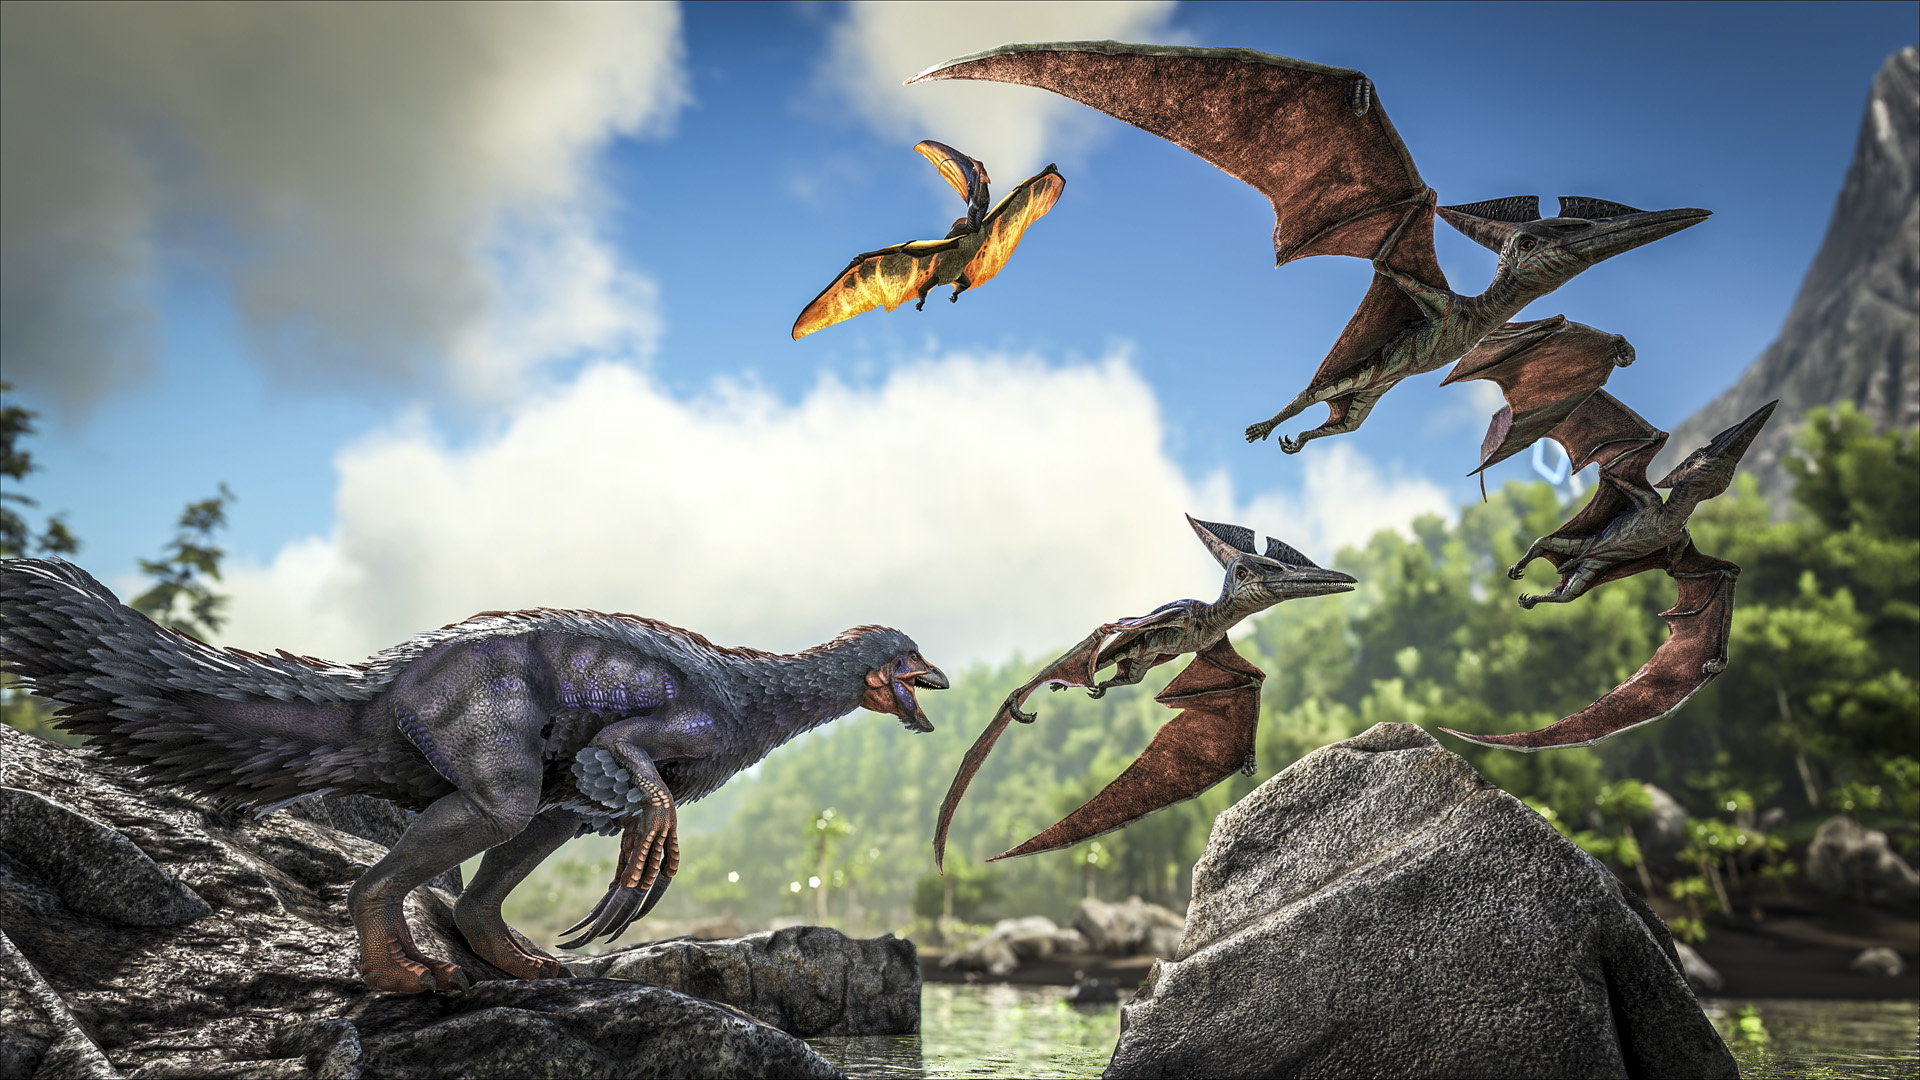 ARK: Survival Evolved: An open world game released in August 2017 using Unreal Engine 4. 1920x1080 Full HD Wallpaper.